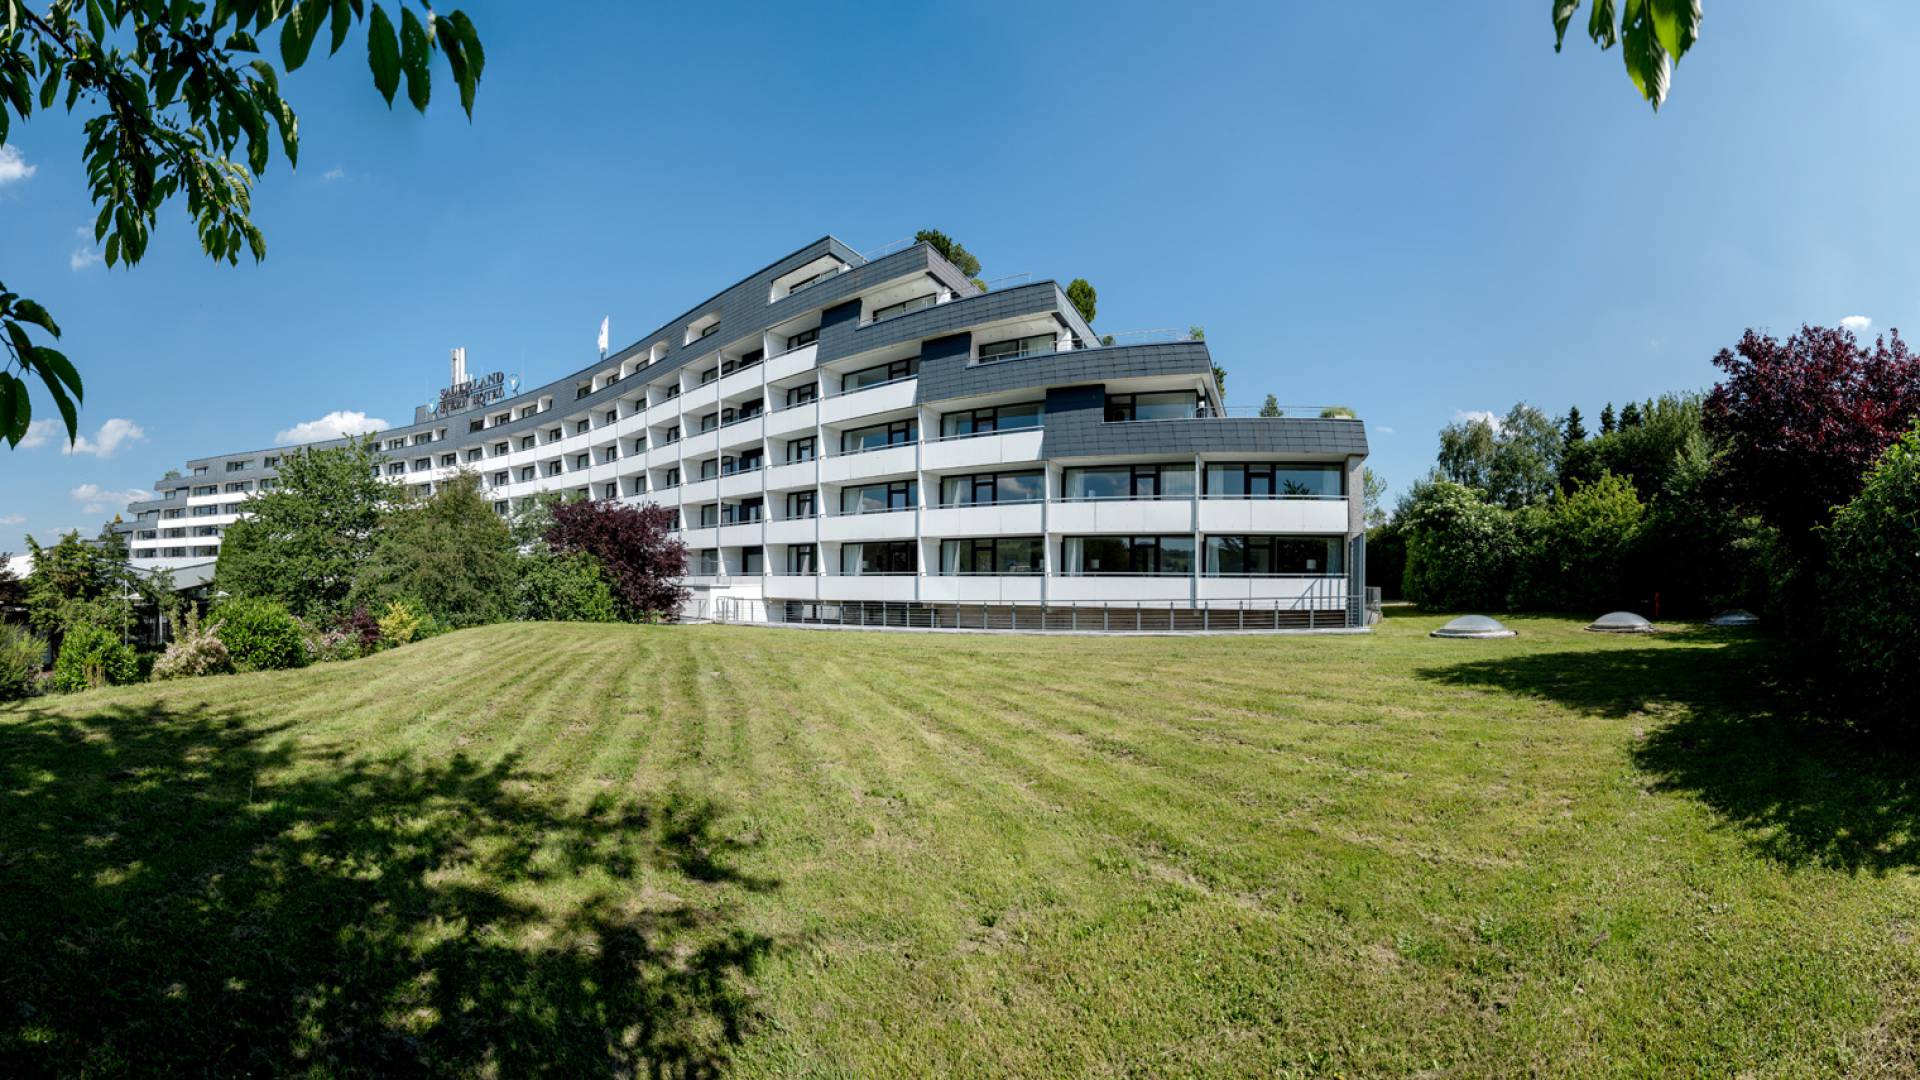 Sauerland Stern Hotel: The largest Hotel in the middle of Germany